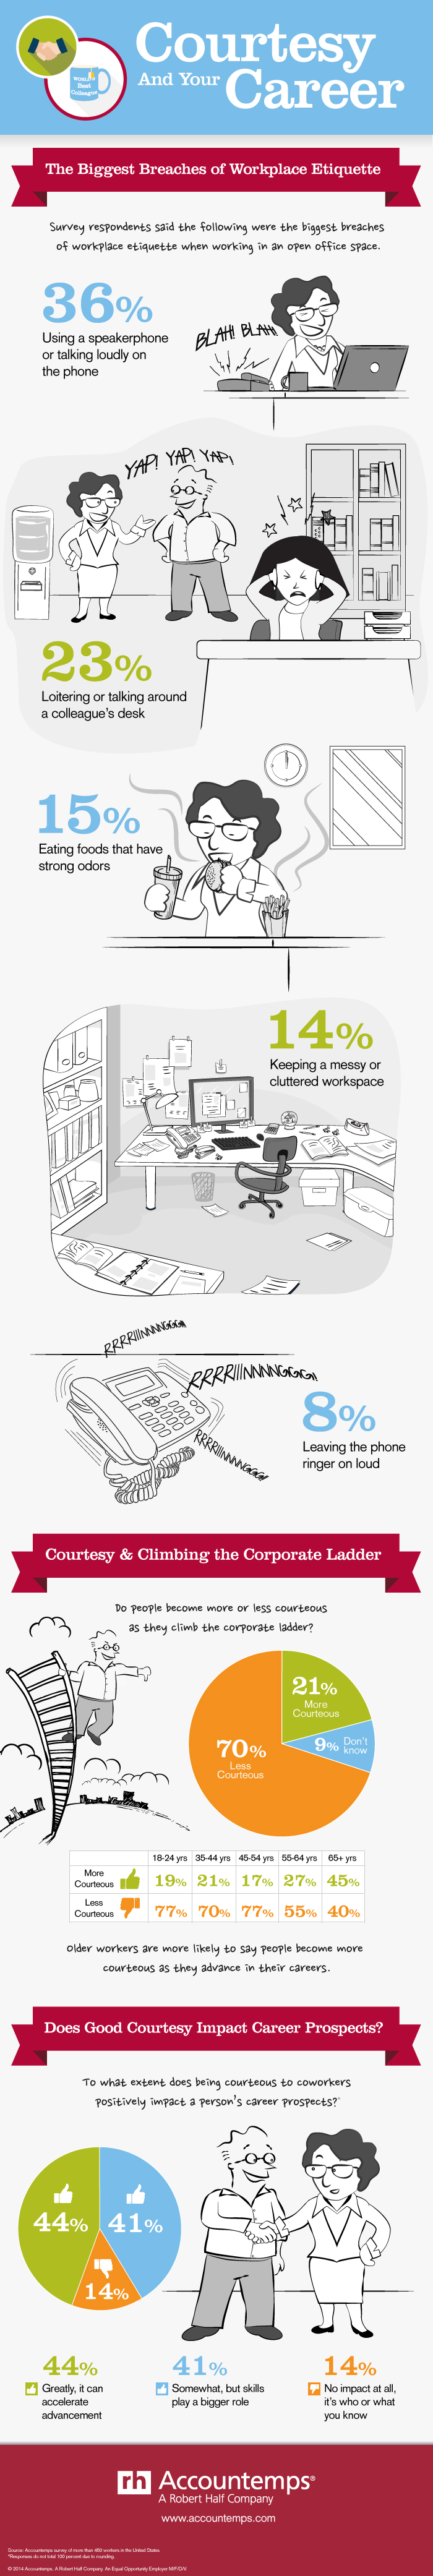 Top 5 Workplace Etiquette Breaches in an Open Office Space